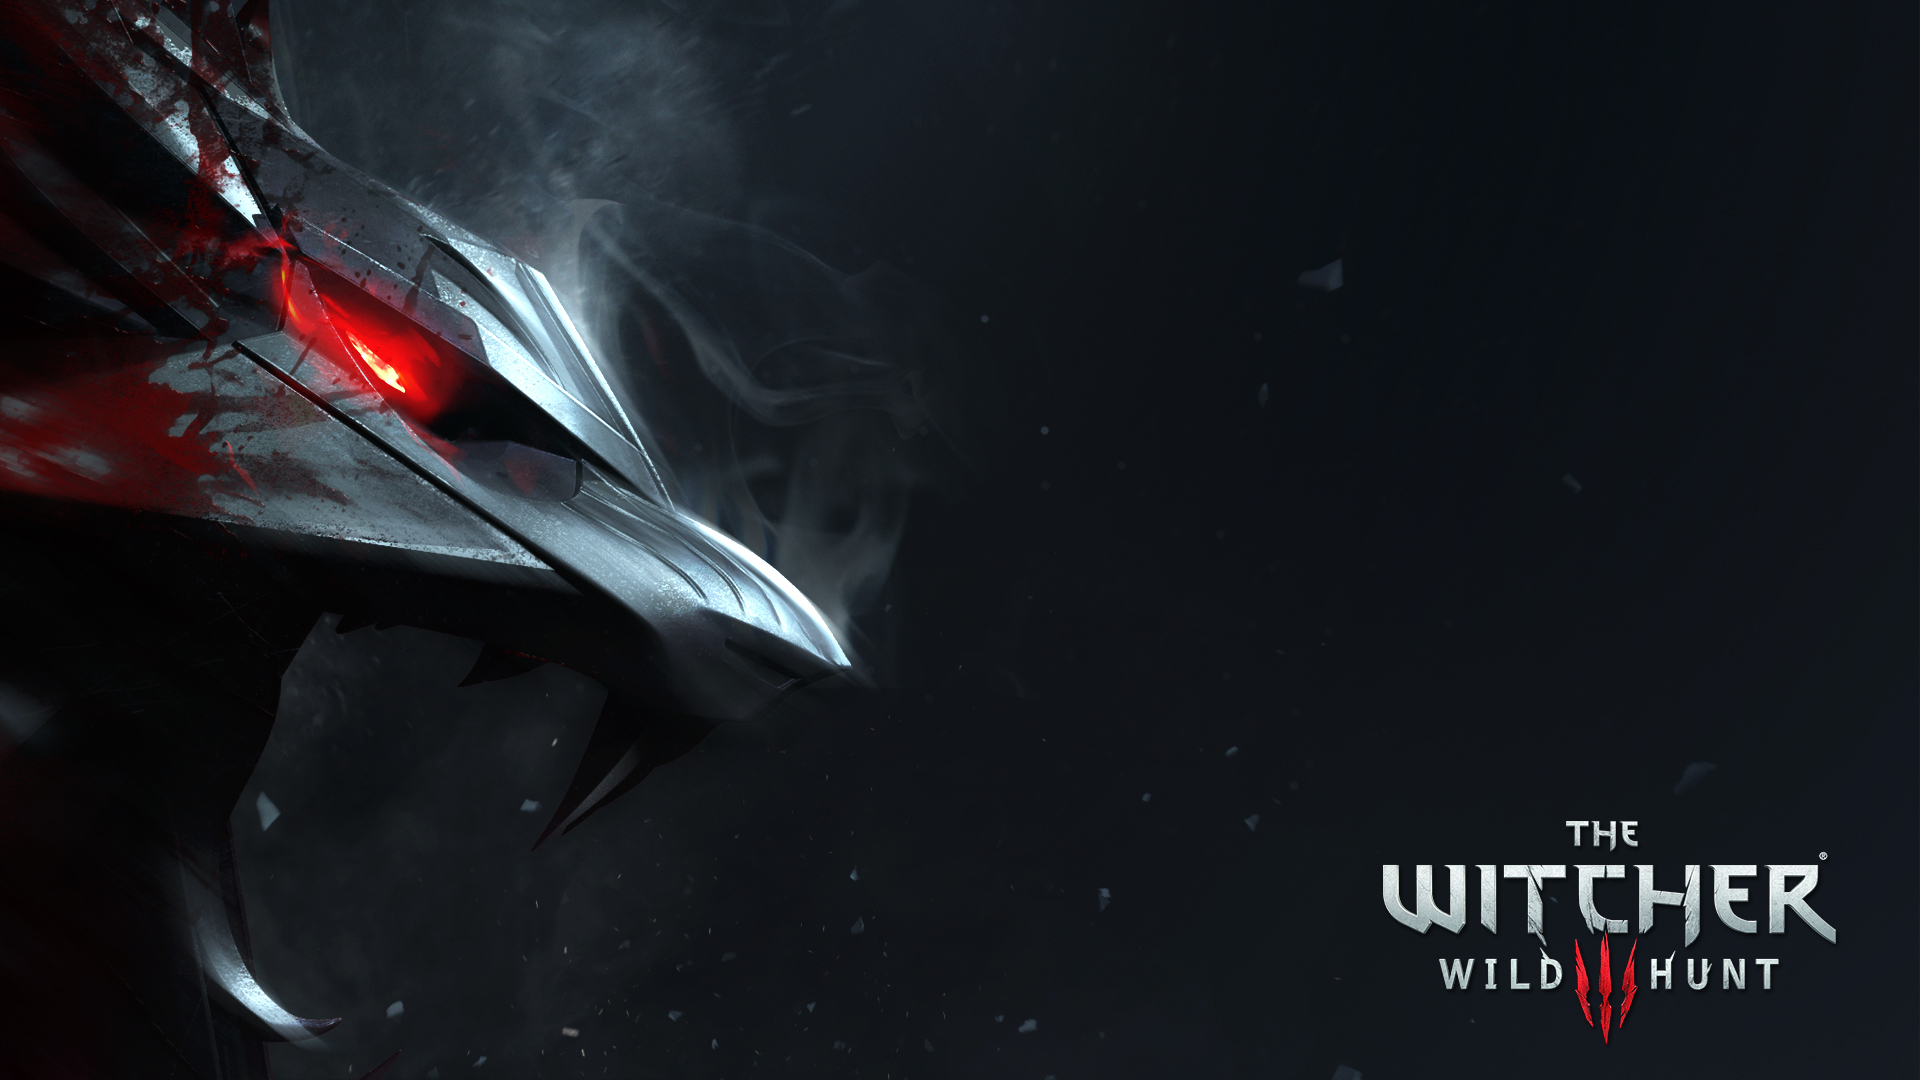 The Witcher 3 Wild Hunt HD Wallpapers 1920 X 1080 1920x1080